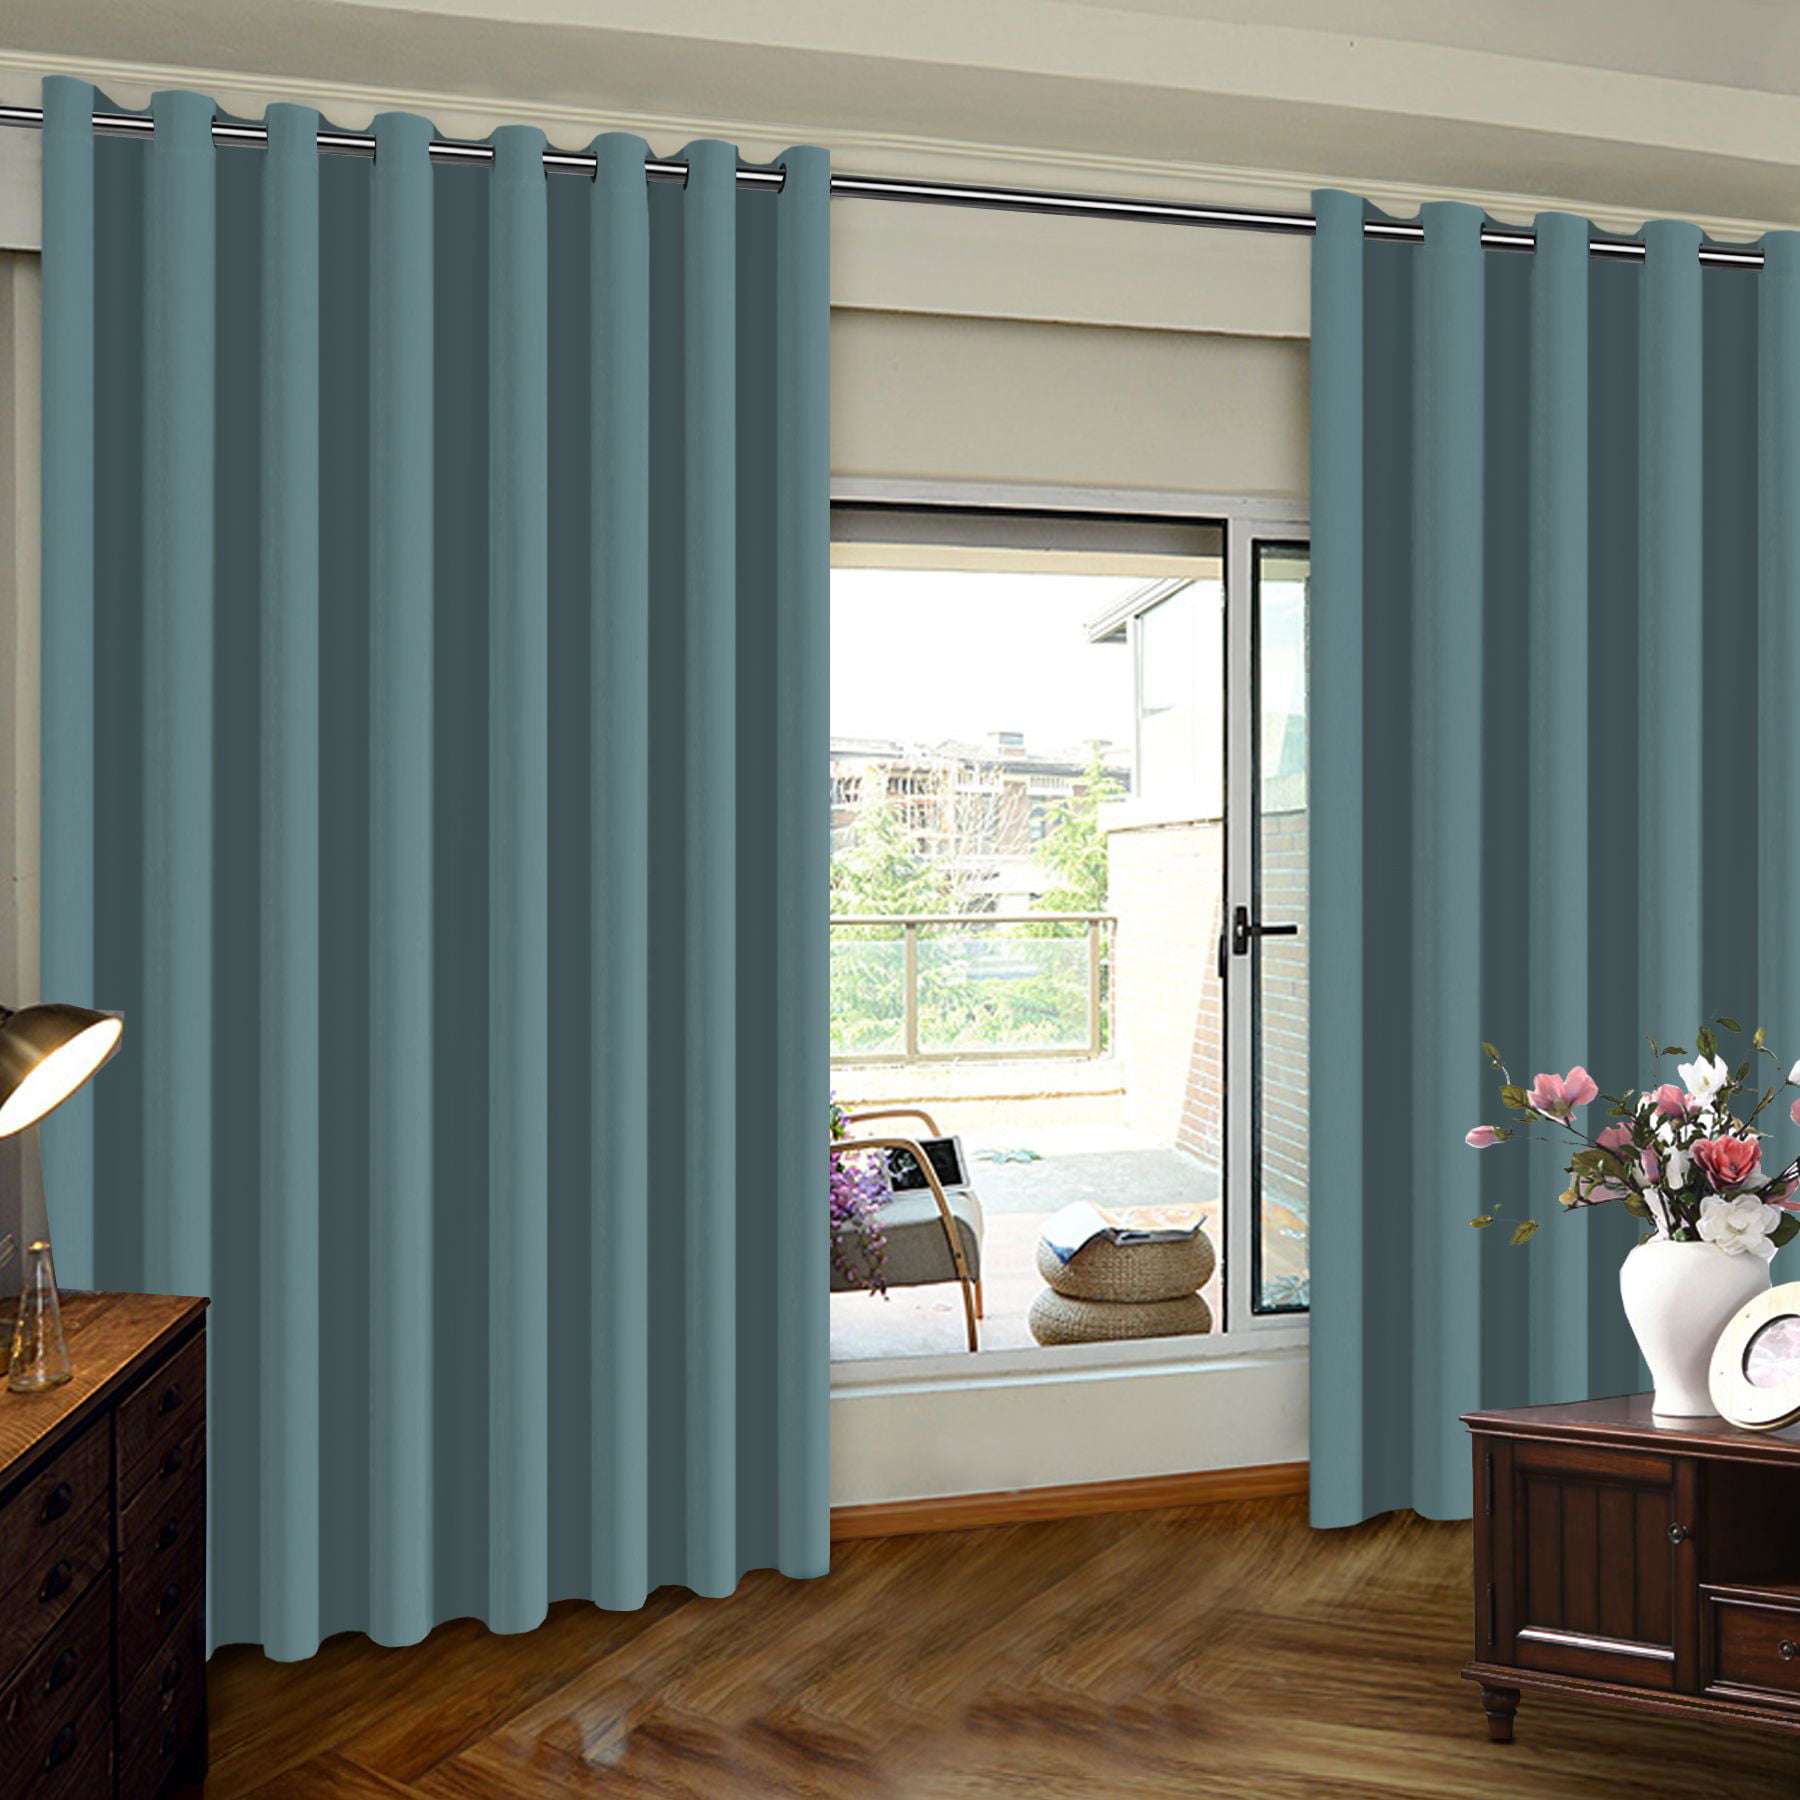 Patio Door Slider Curtains Extra Wide, Wide Panel Curtains For Sliding Glass Doors